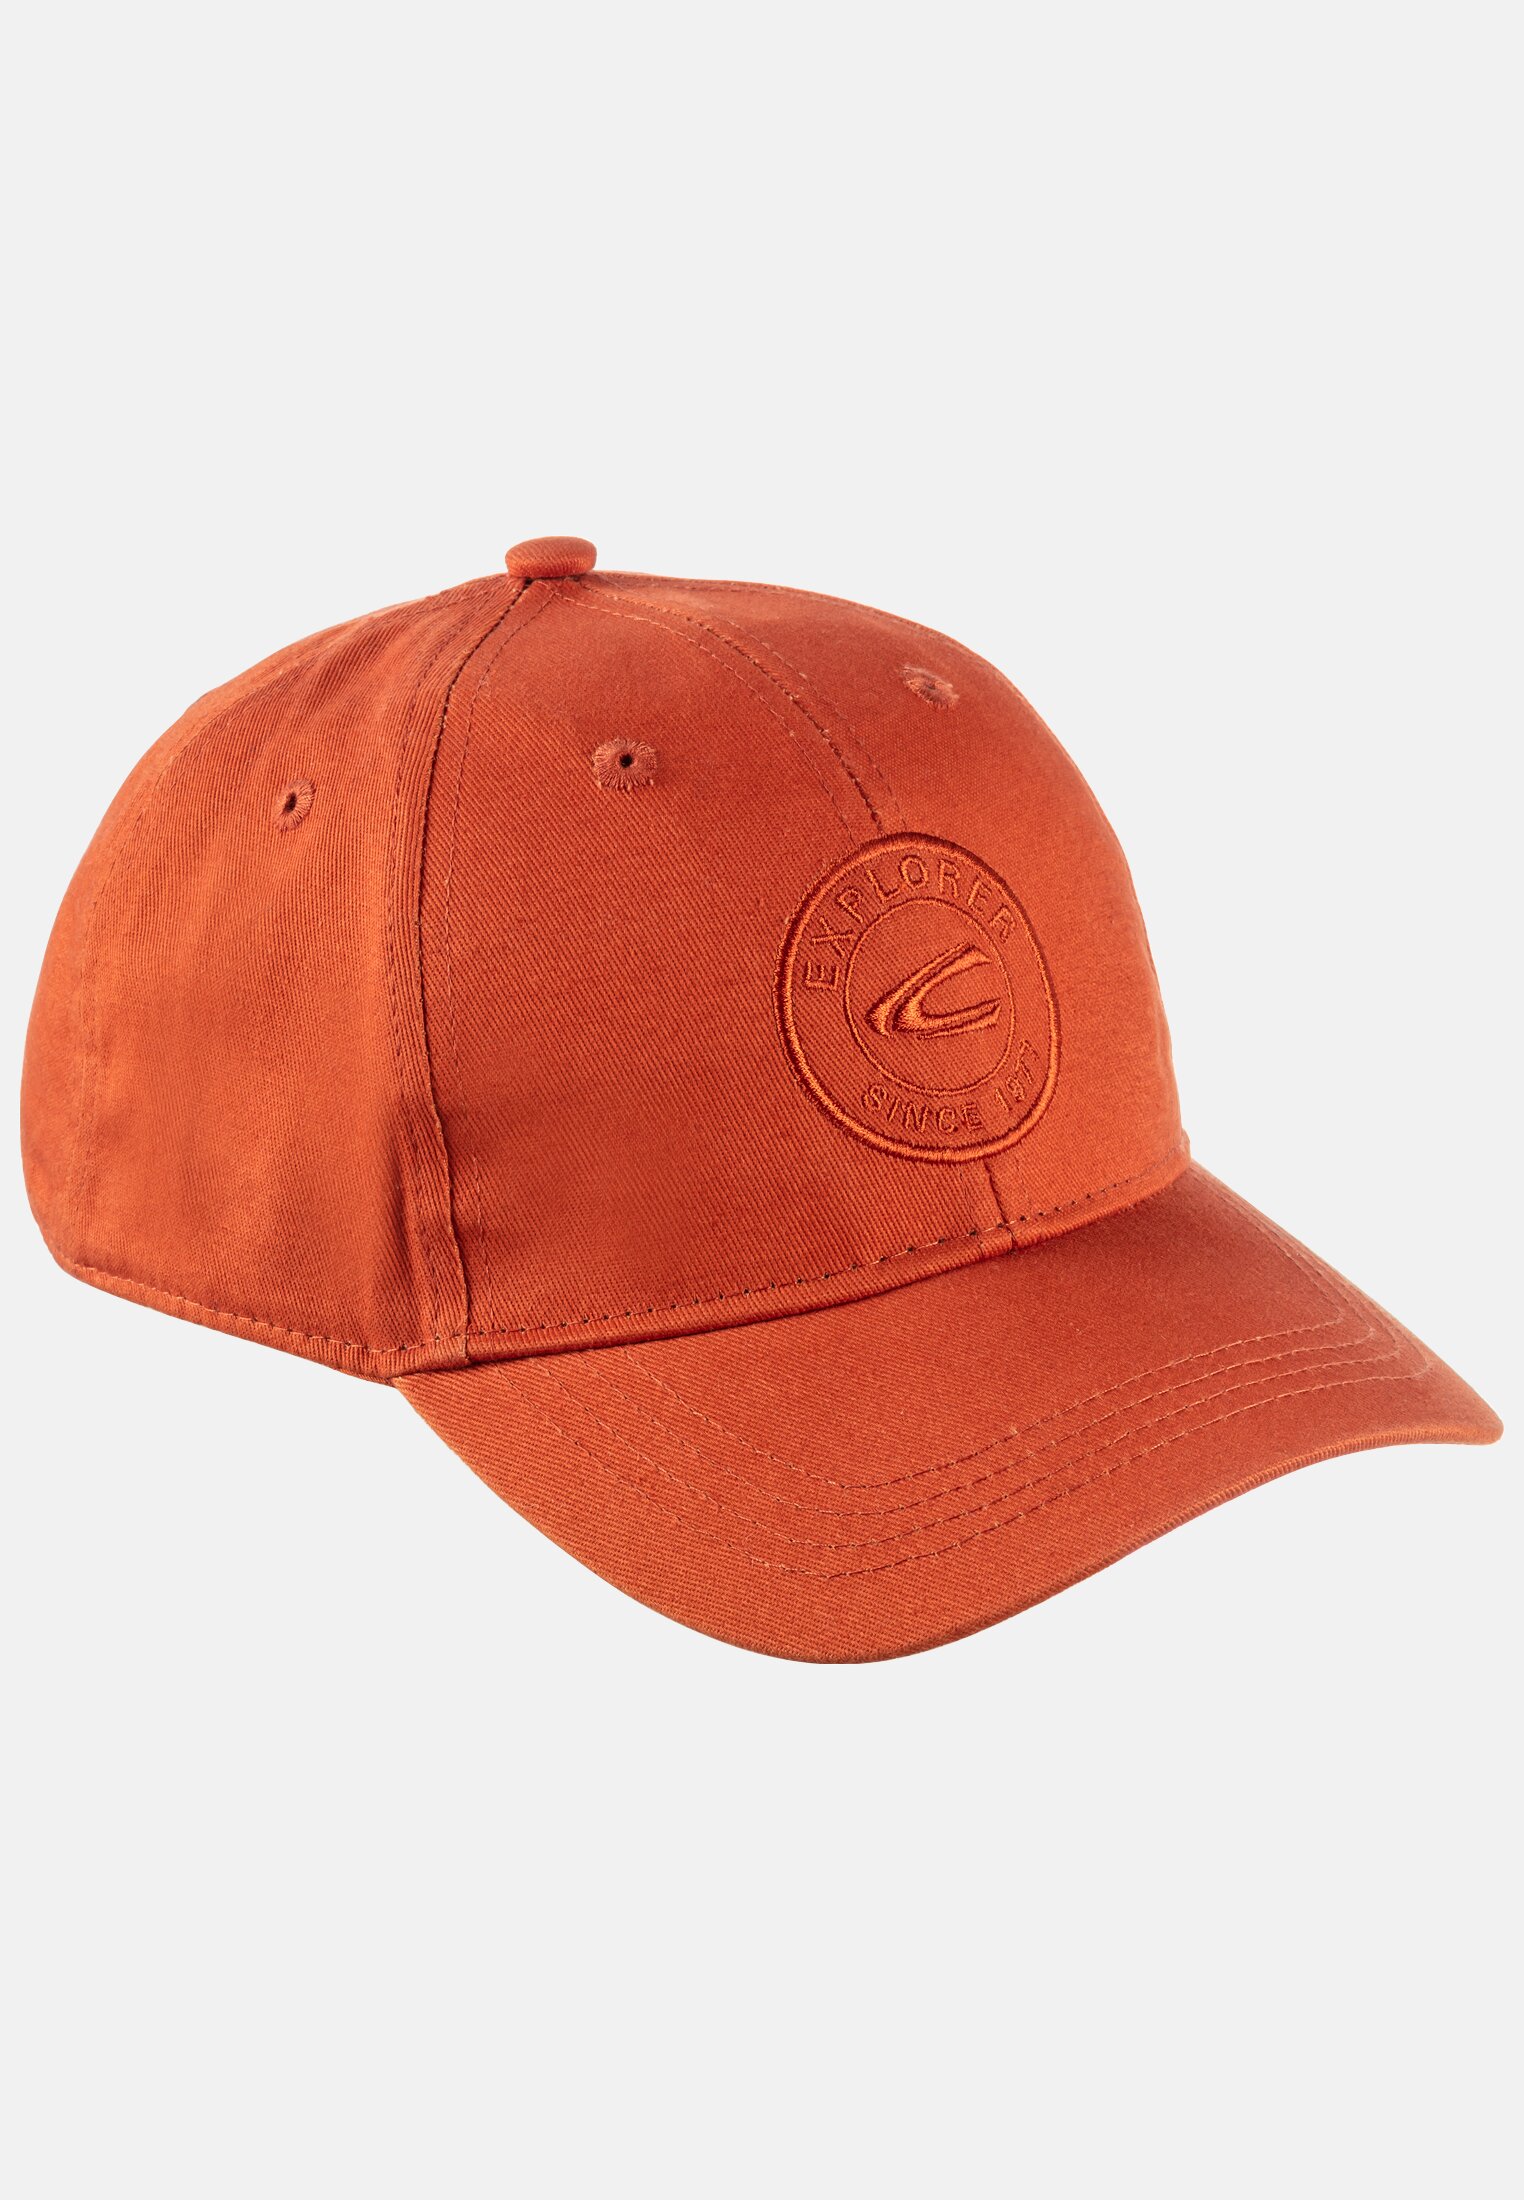 Camel Active Basic cap made from pure cotton